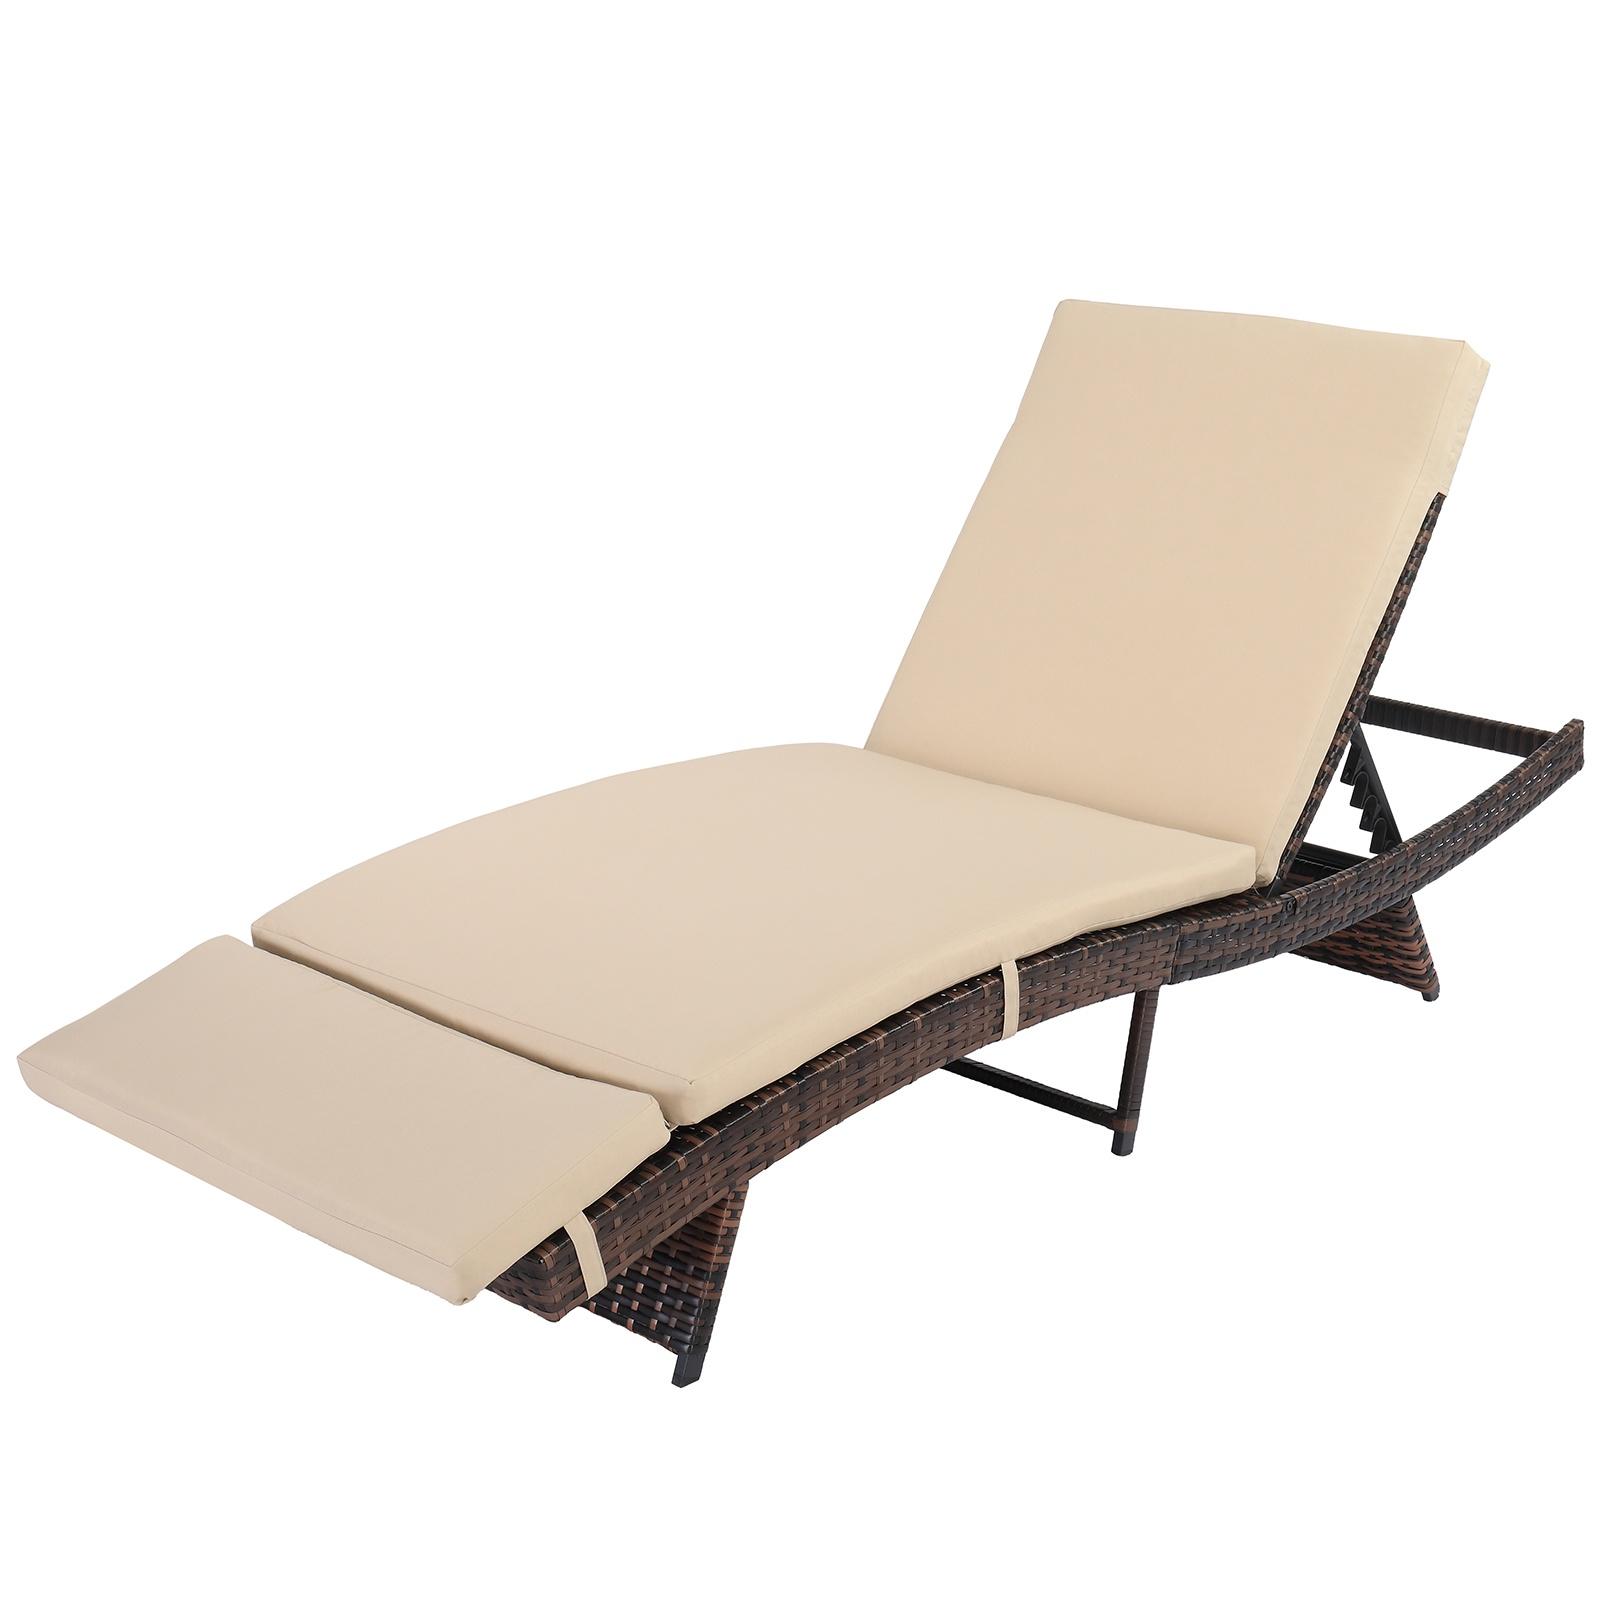 Black Rattan Chaise Lounge, Patio Lounge Chair with Canopy and Cushions, Outdoor Reclining Chair Furniture for Garden, Poolside, Deck, Backyard - image 1 of 10